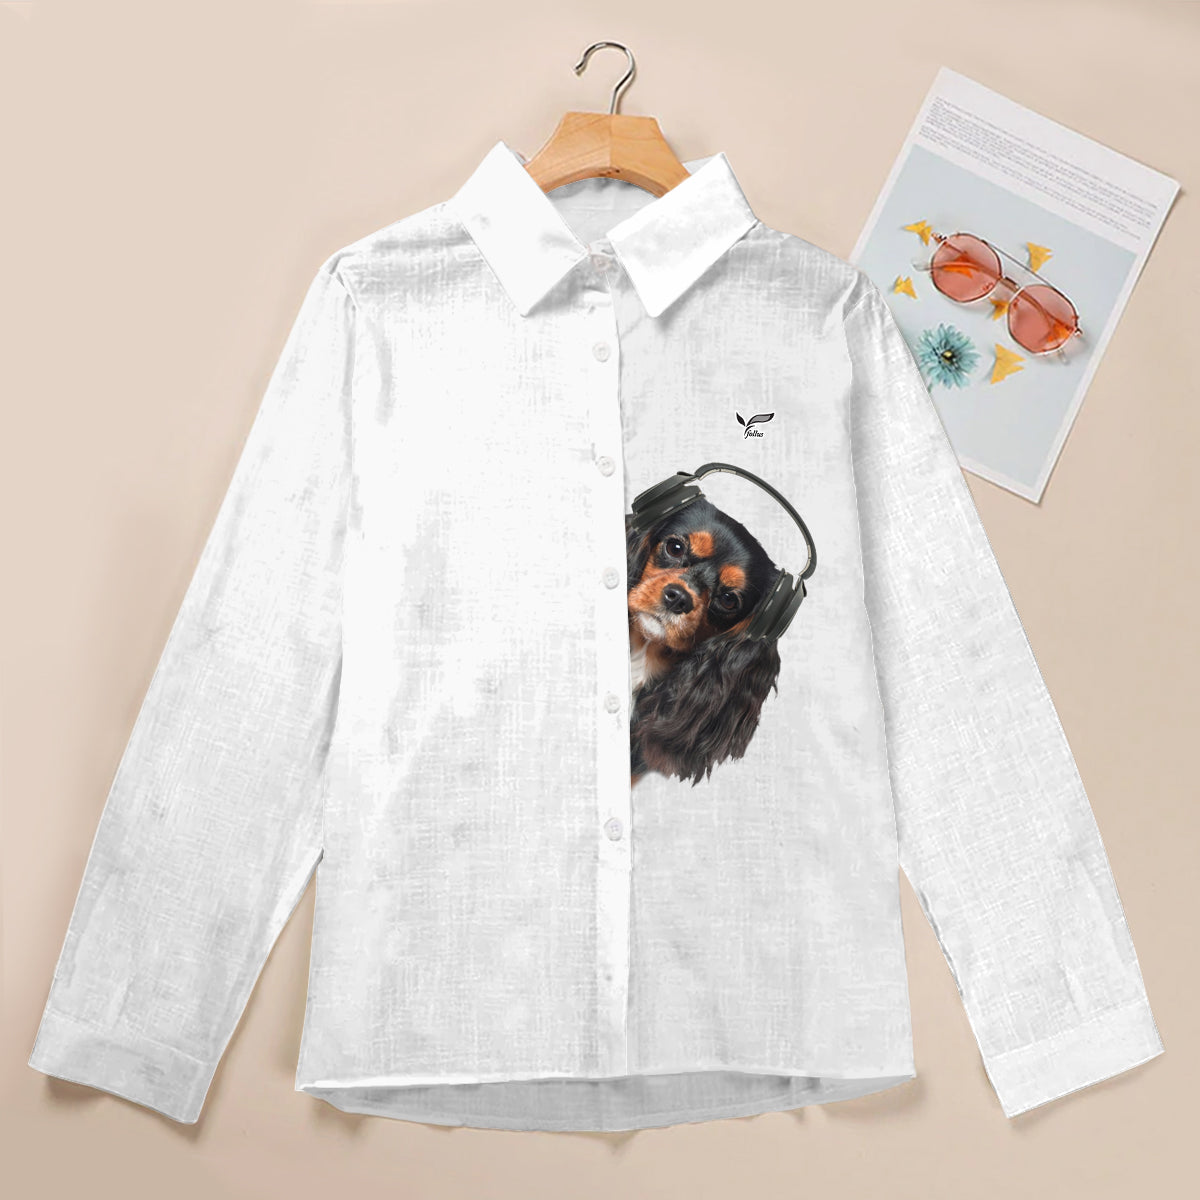 Great Music With Cavalier King Charles Spaniel - Women's Long-Sleeve Shirt V3